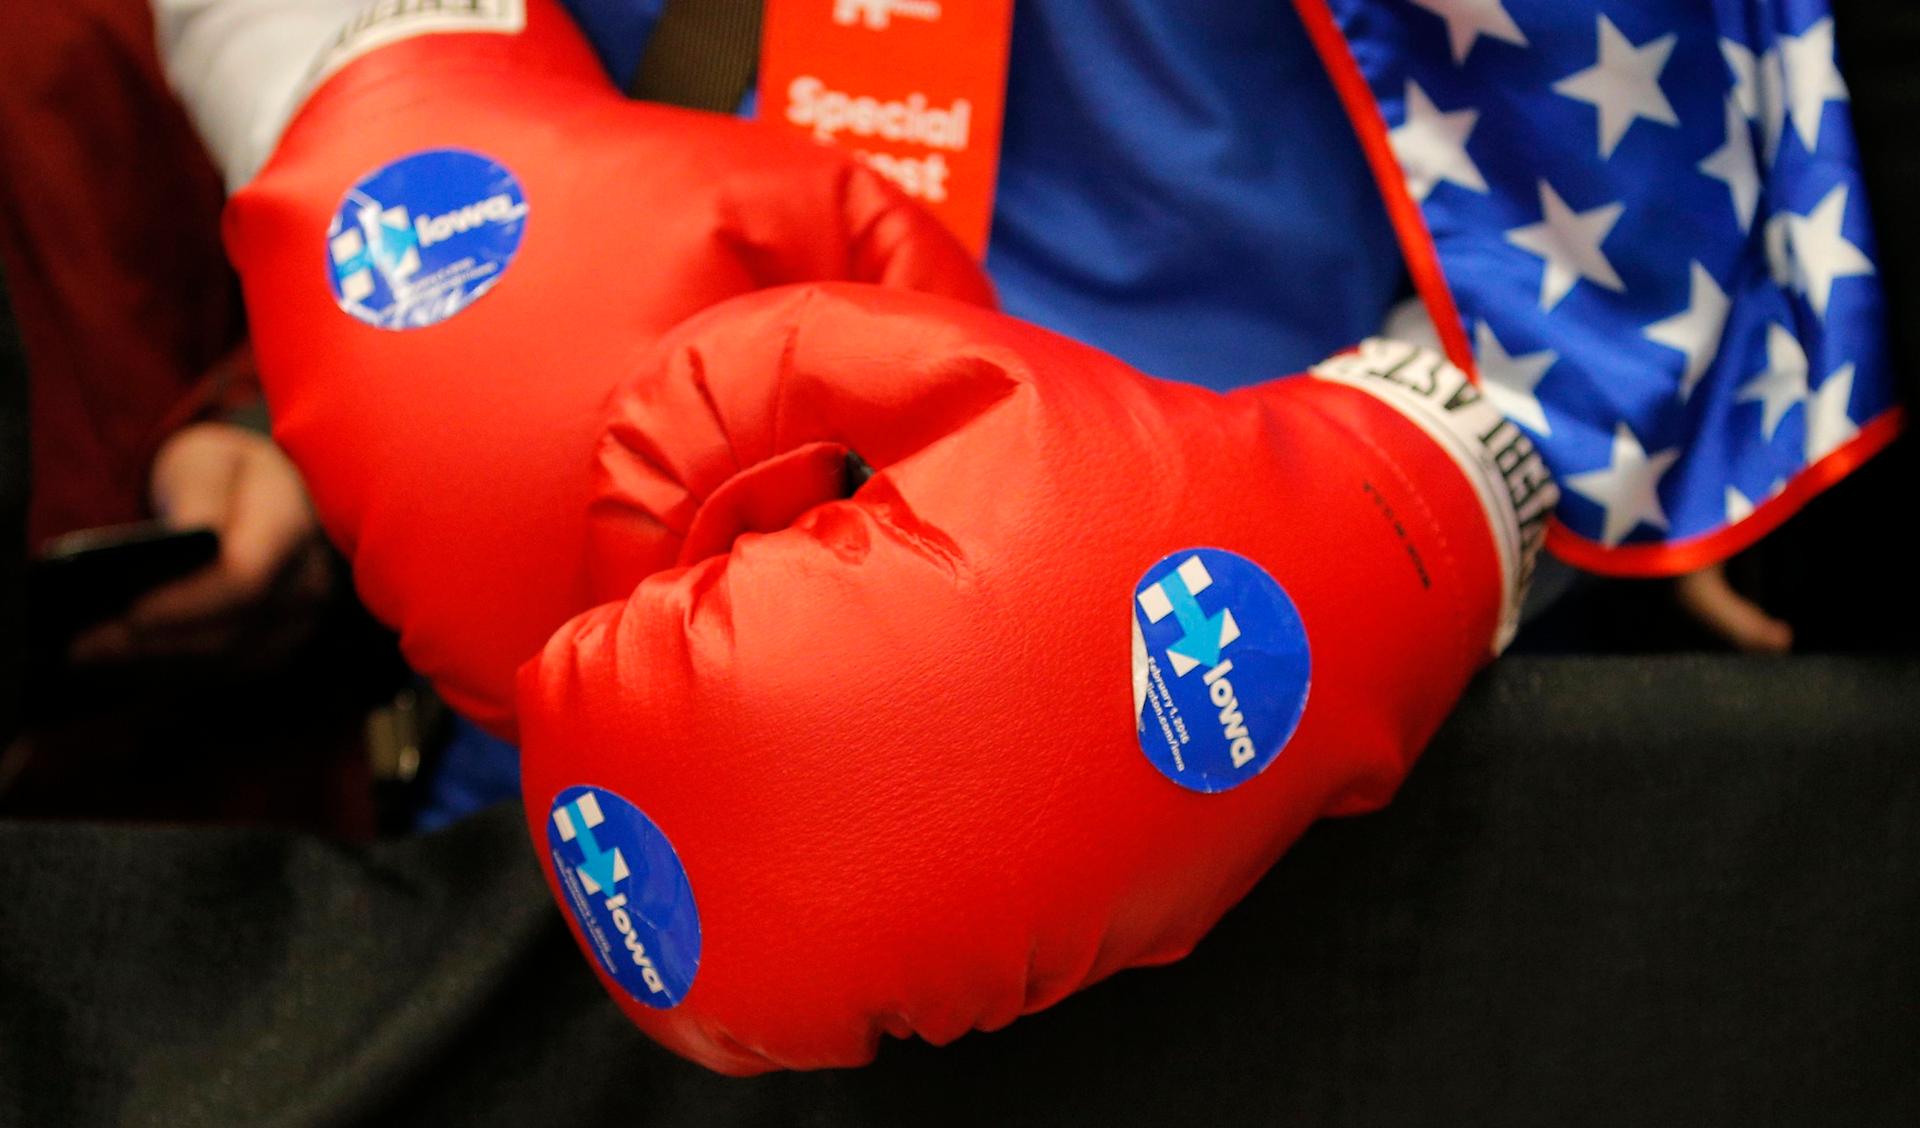 Political boxing gloves